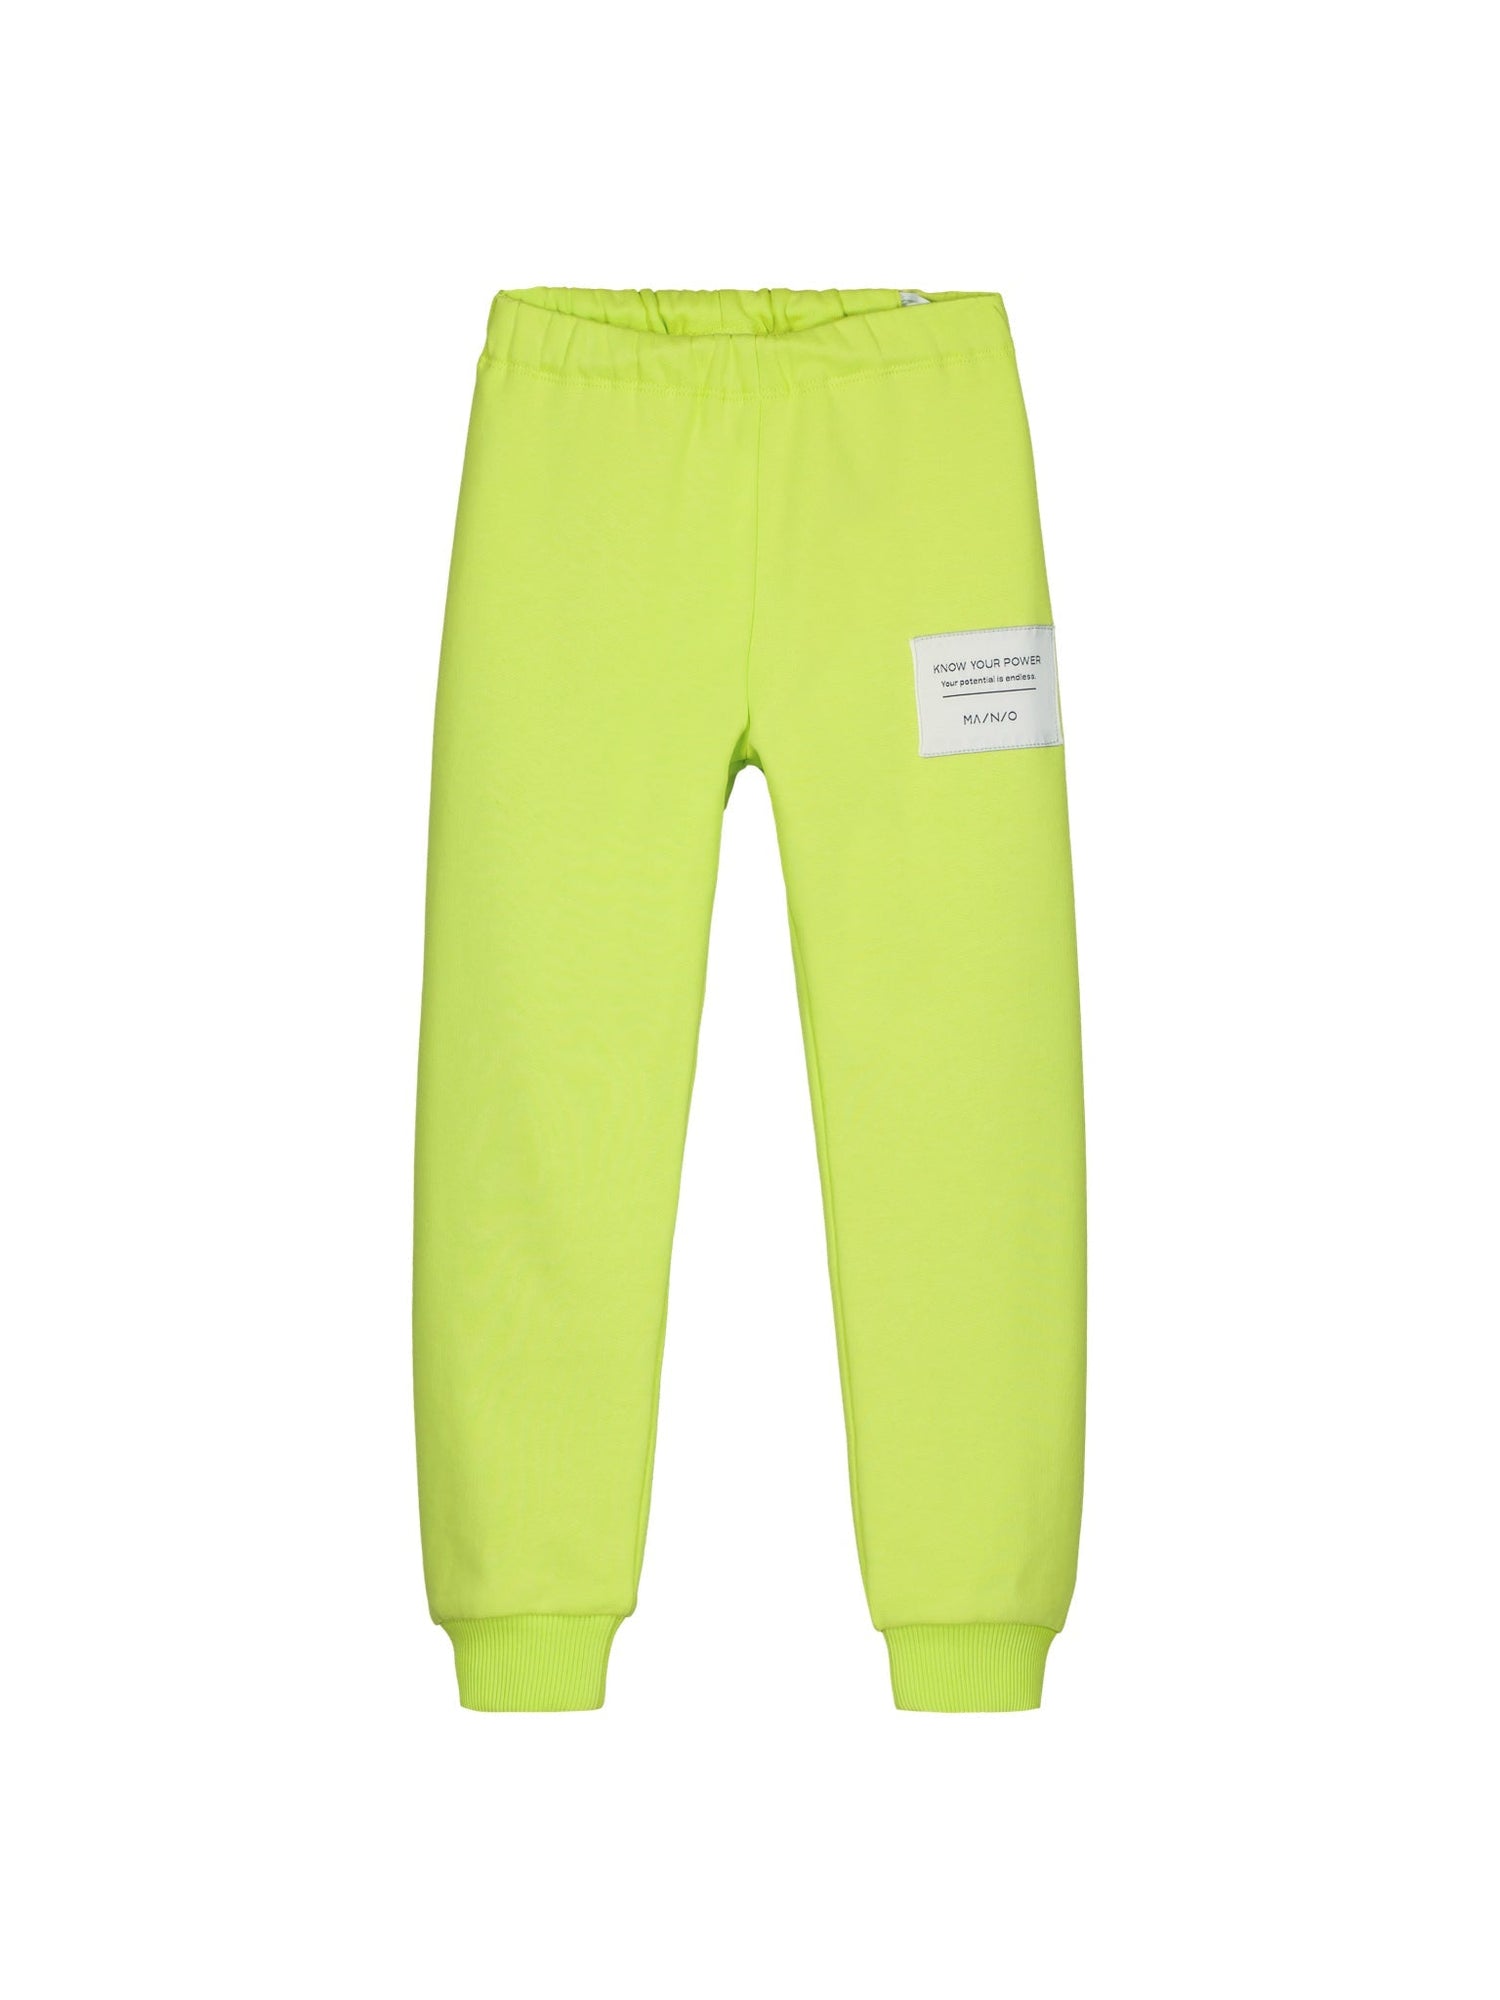 Kids' Superpower Sweatpants Lime